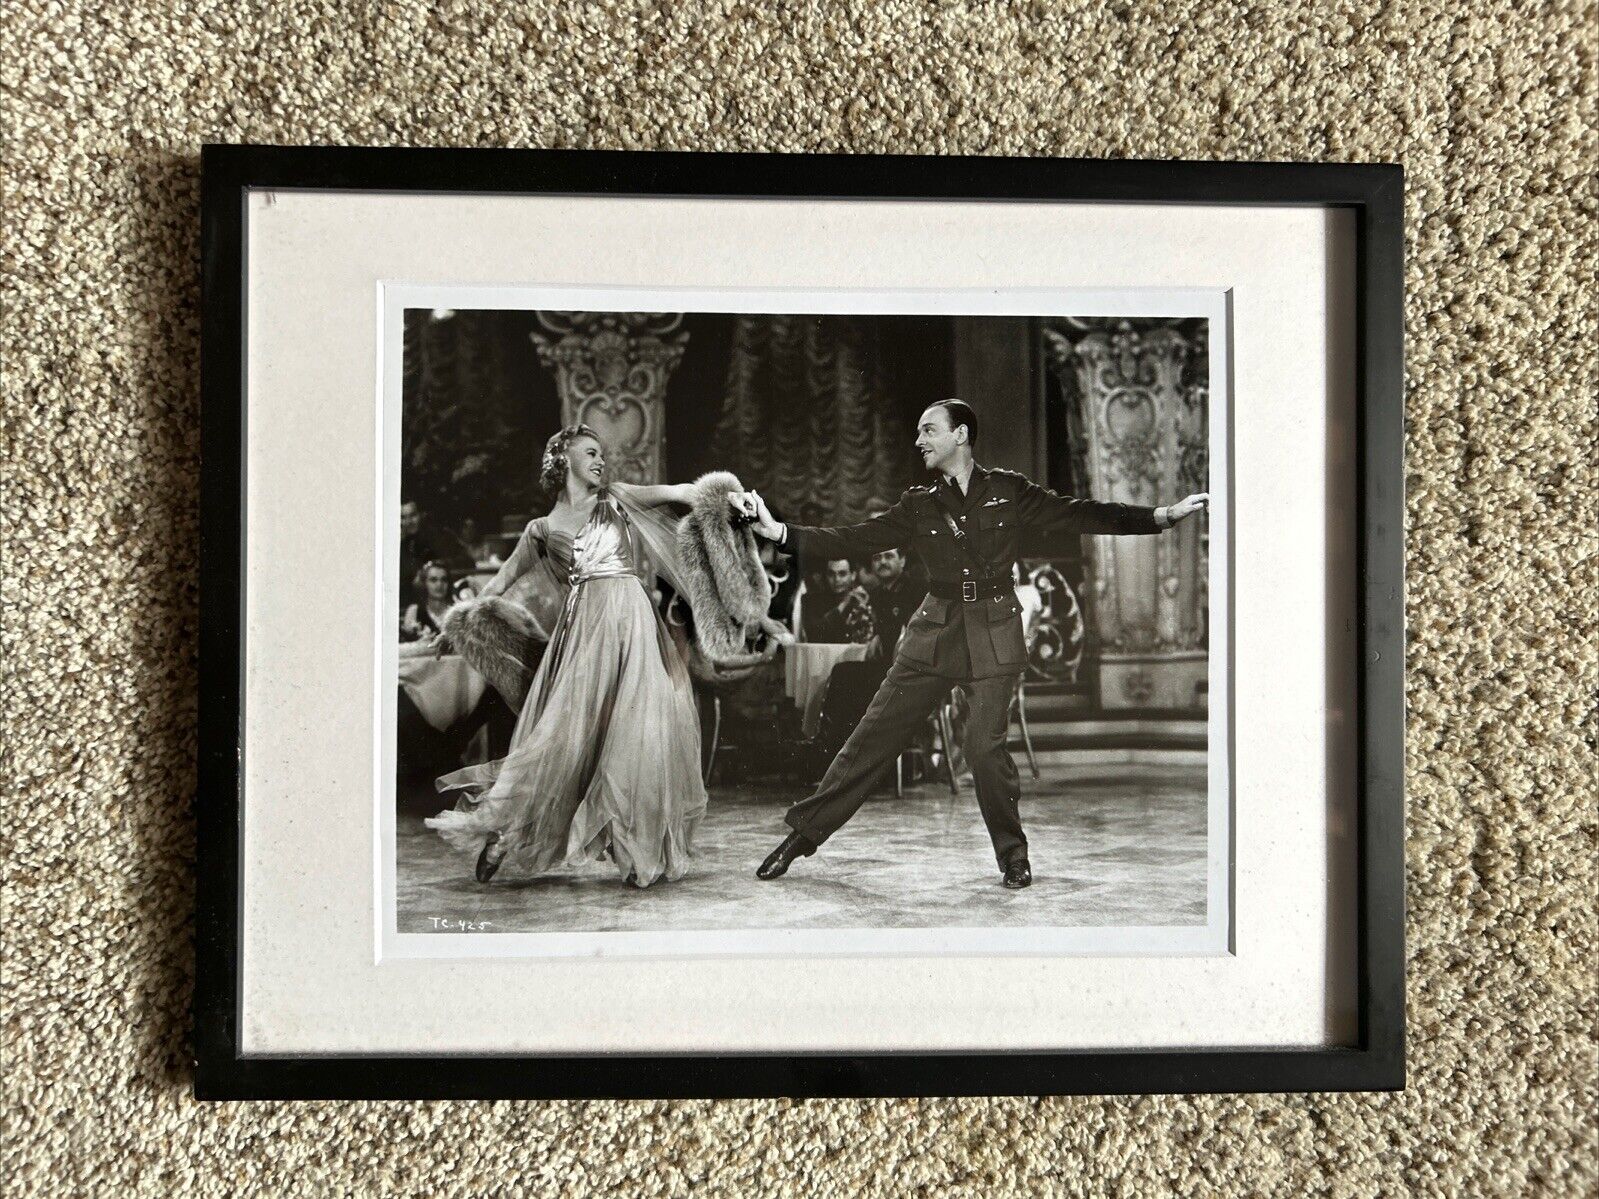 FRED ASTAIRE & GINGER ROGERS Dancing Vtg B&W 14x 11 Hollywood Framed Photo